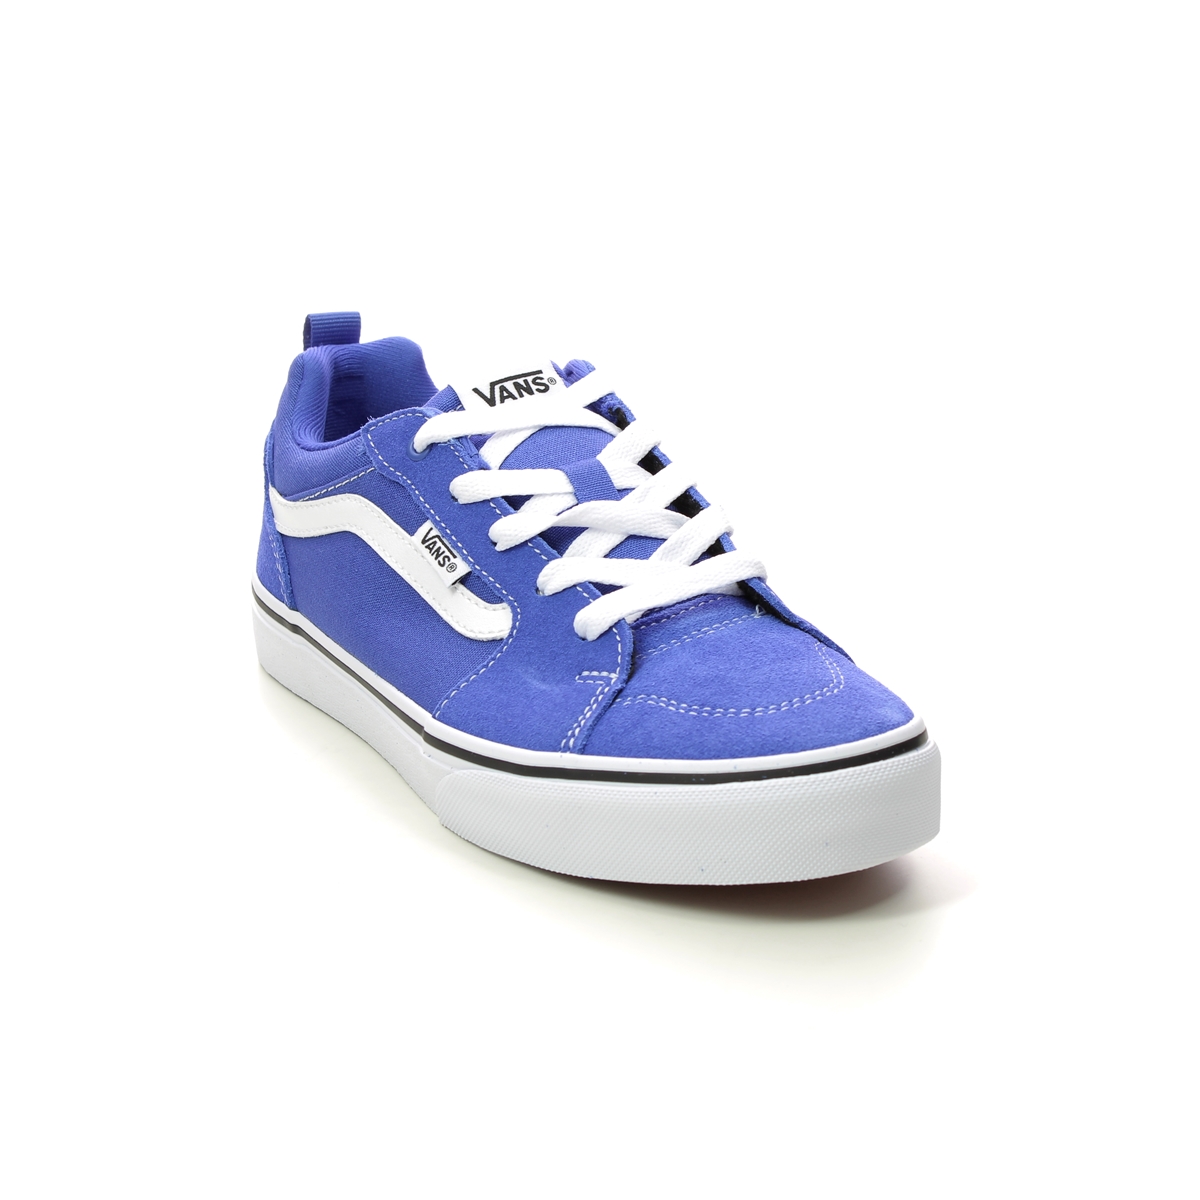 Vans Filmore Youth Blue Kids Trainers  Vn0A3Mvpb-Bt In Size 5 In Plain Blue Vans Boys Trainers For kids